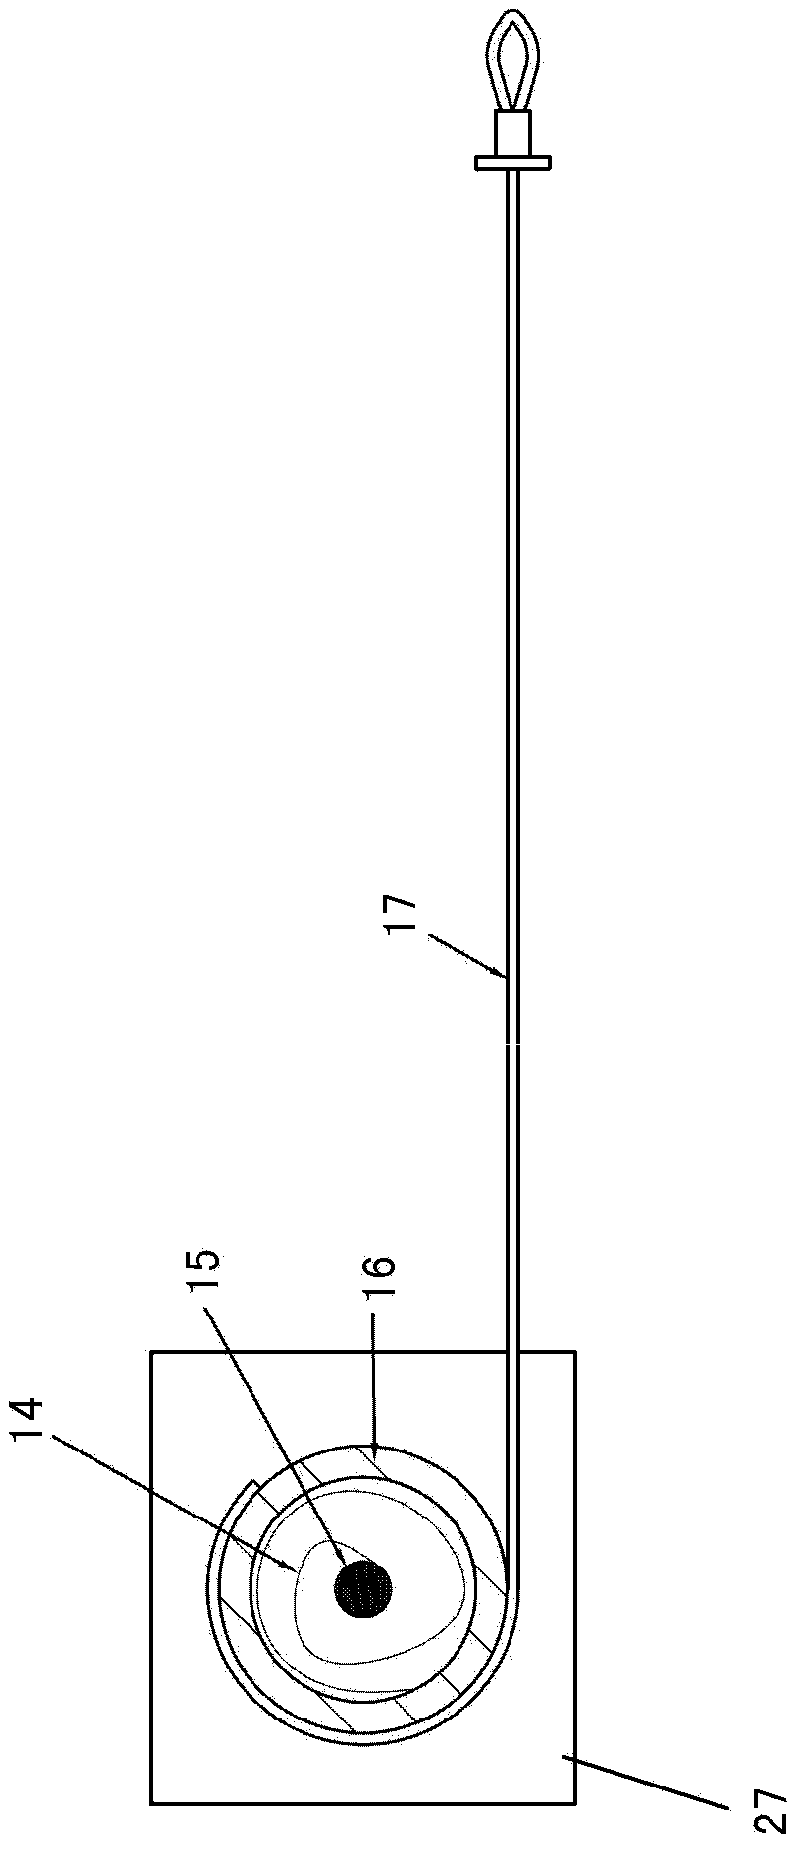 Sliding door pulling and buffering device